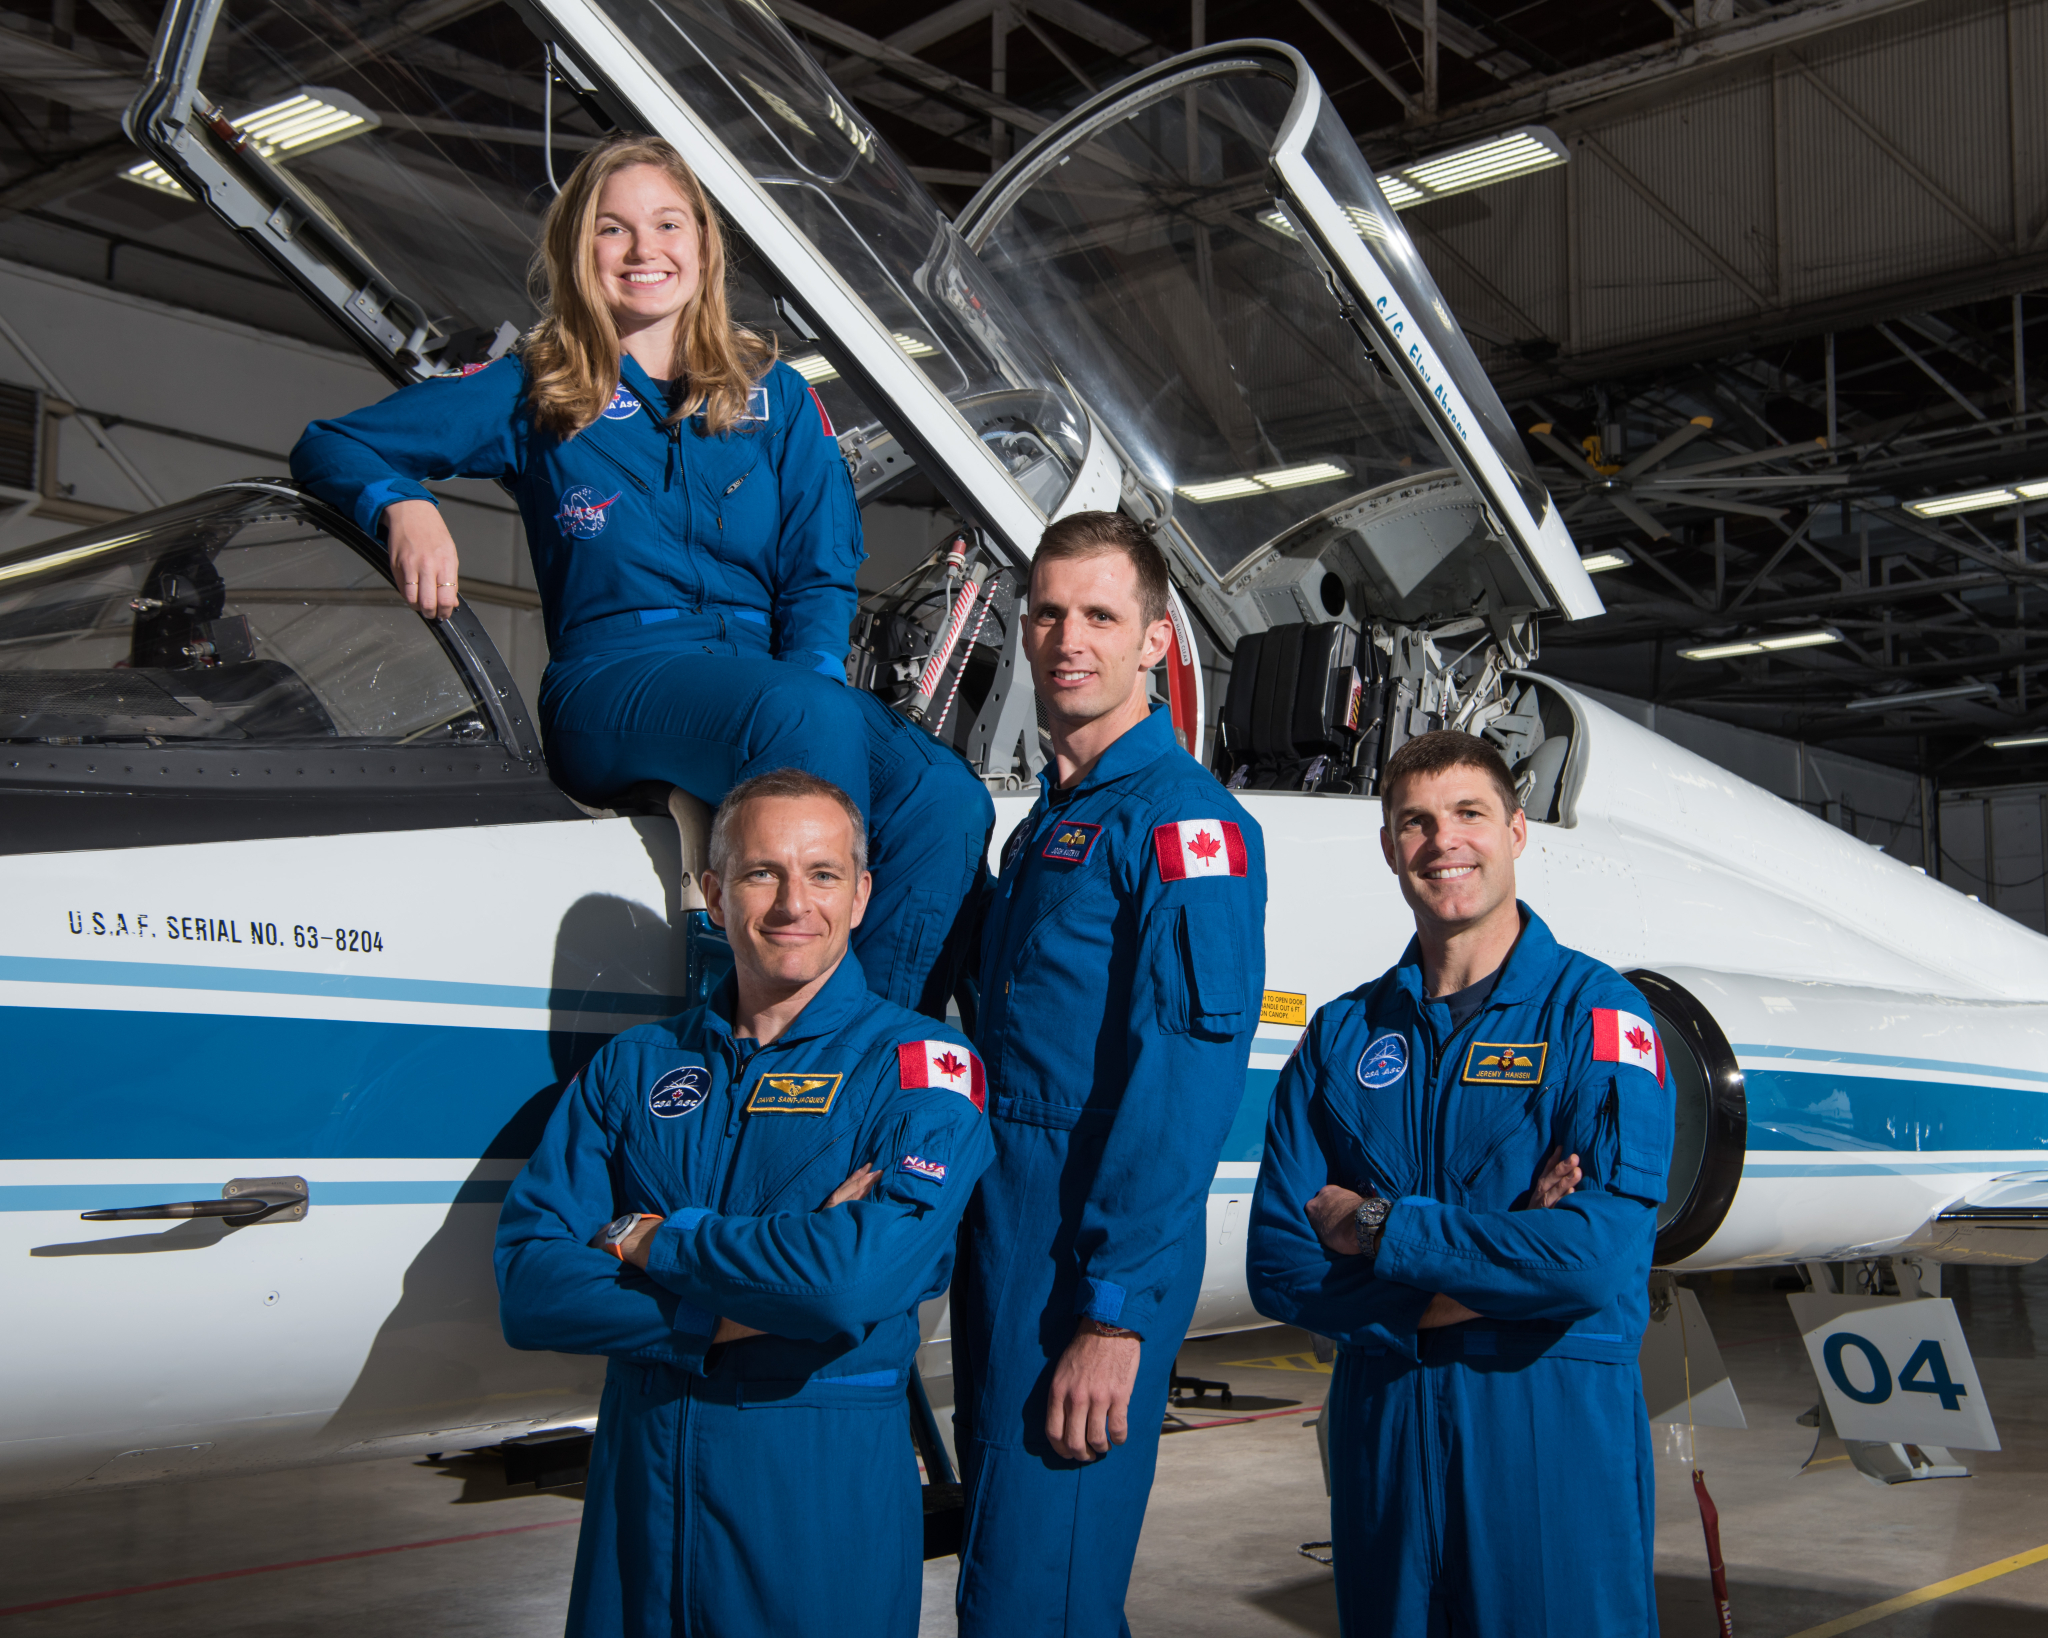 The Canadian Space Agency's active astronaut corps. From left, standing: David Saint-Jacques, Joshua Kutryk, Jeremy Hansen. Sitting on T-38N Talon plane: Jenni Gibbons.